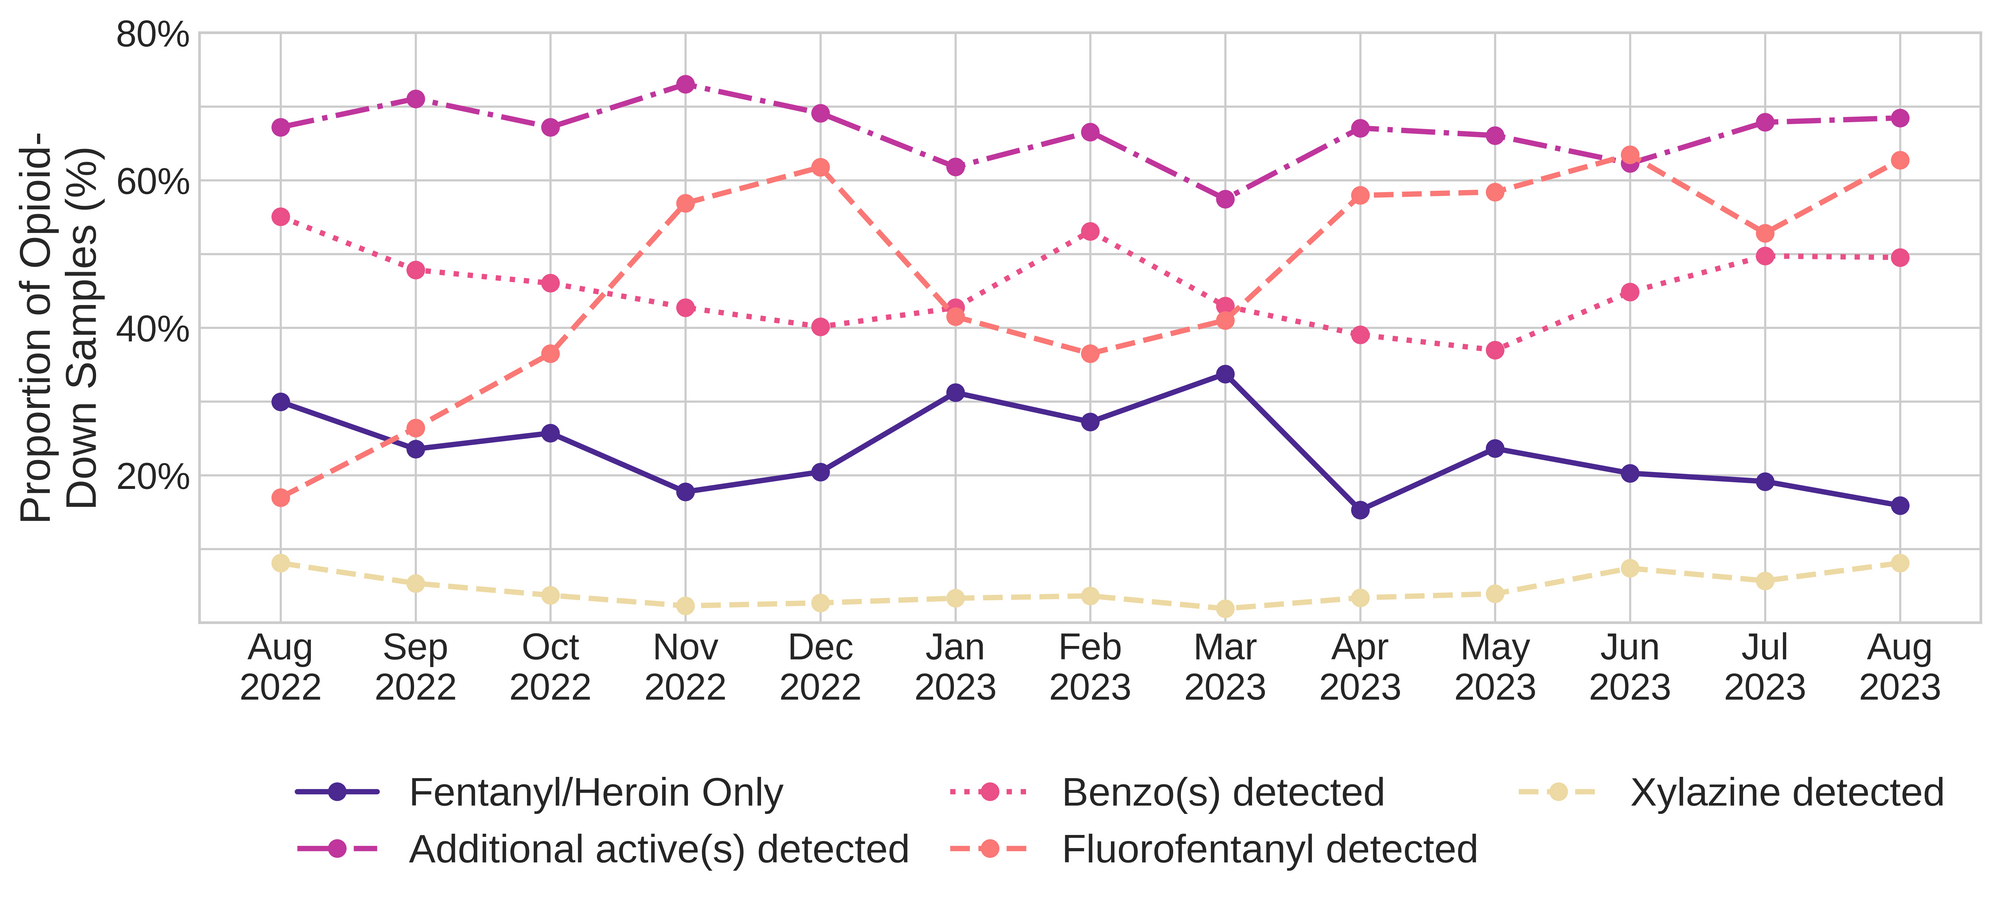 Figure 3. The percentage of expected opioid-down samples checked between August 2022 and August 2023 that only contained fentanyl/heroin actives (solid dark blue), opioid-down samples with an additional active detected (dot-dashed purple), opioid-down samples that contained a benzodiazepine-related drug (dotted magenta), opioid-down samples that contained fluorofentanyl (dashed salmon), and opioid-down samples that contained xylazine (dashed yellow).